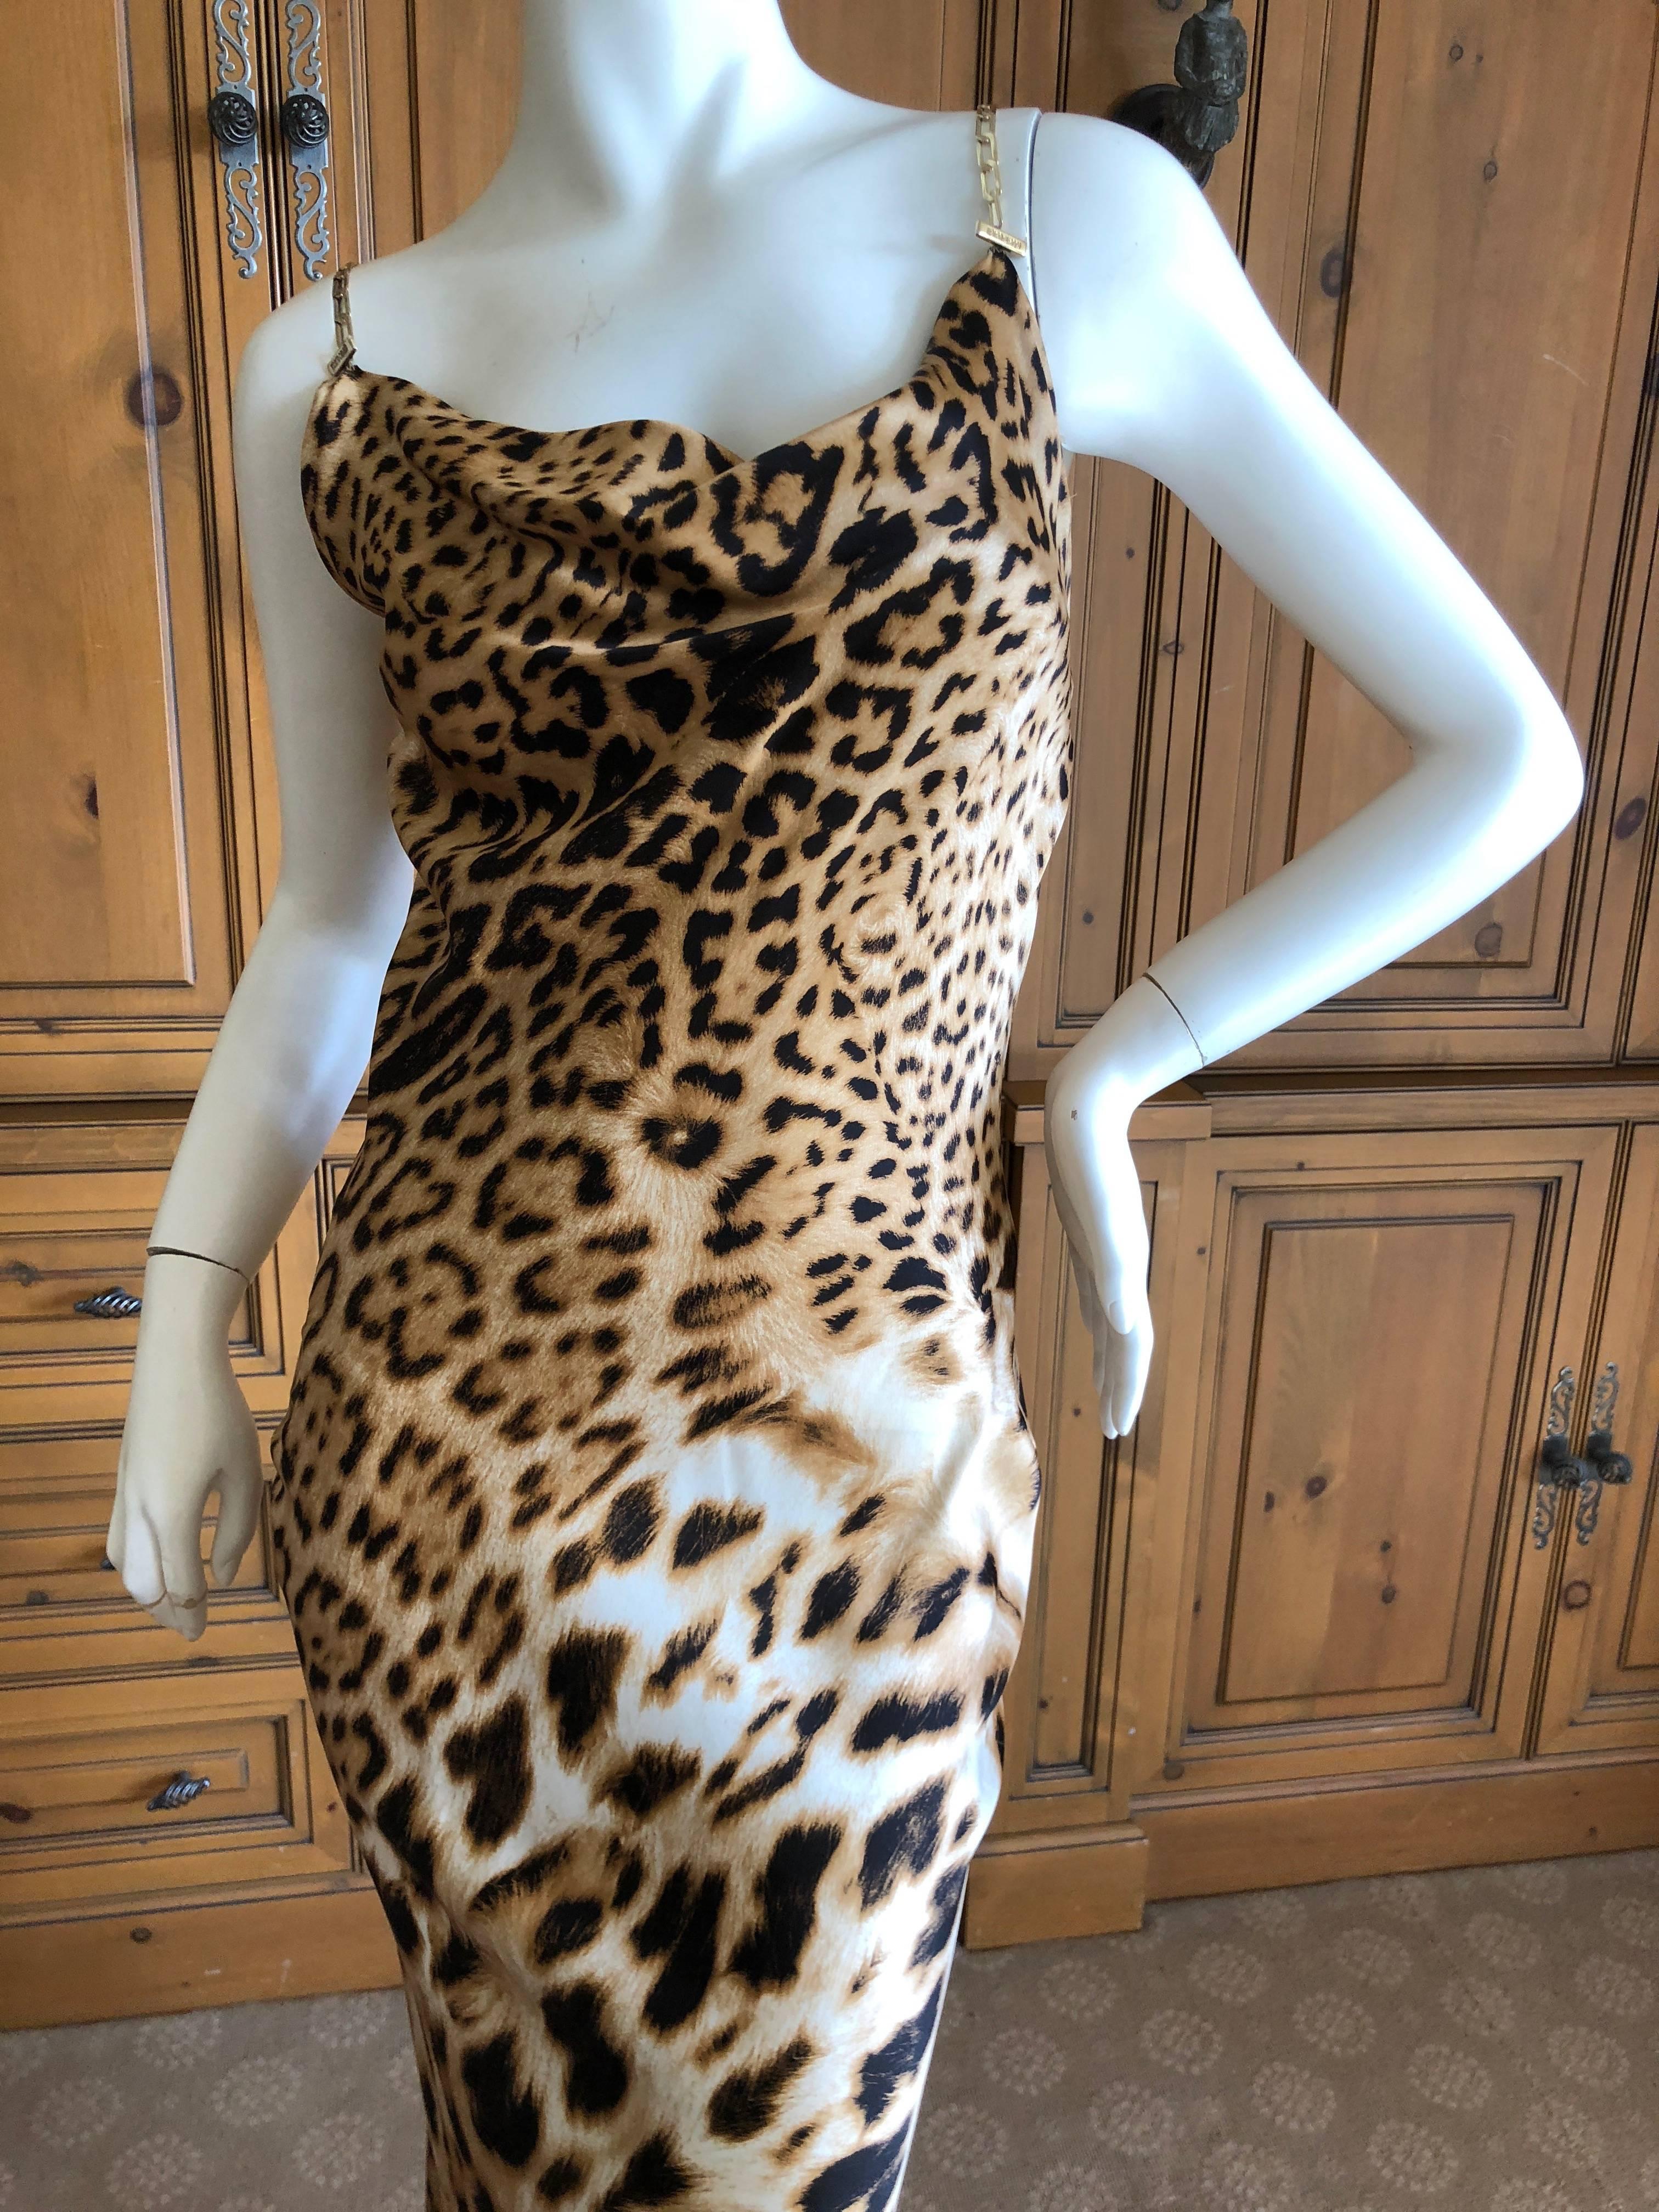 Roberto Cavalli Vintage Leopard Print Evening Dress with Gold Chain Straps
This is so pretty, and features gold chain straps.
Size Small
Bust  35